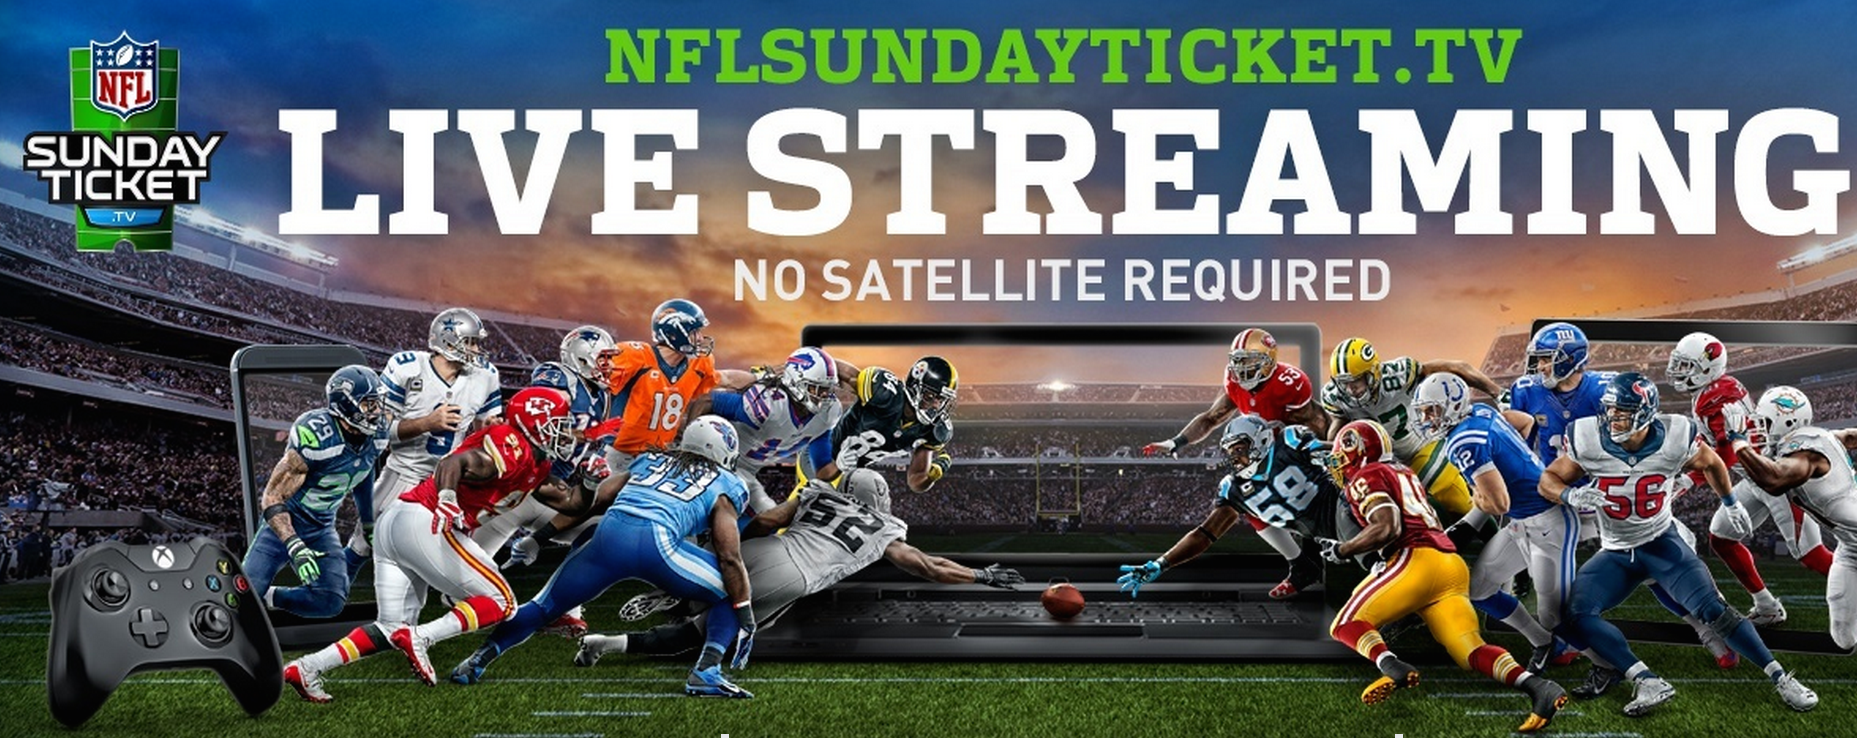 sunday ticket for non directv customers